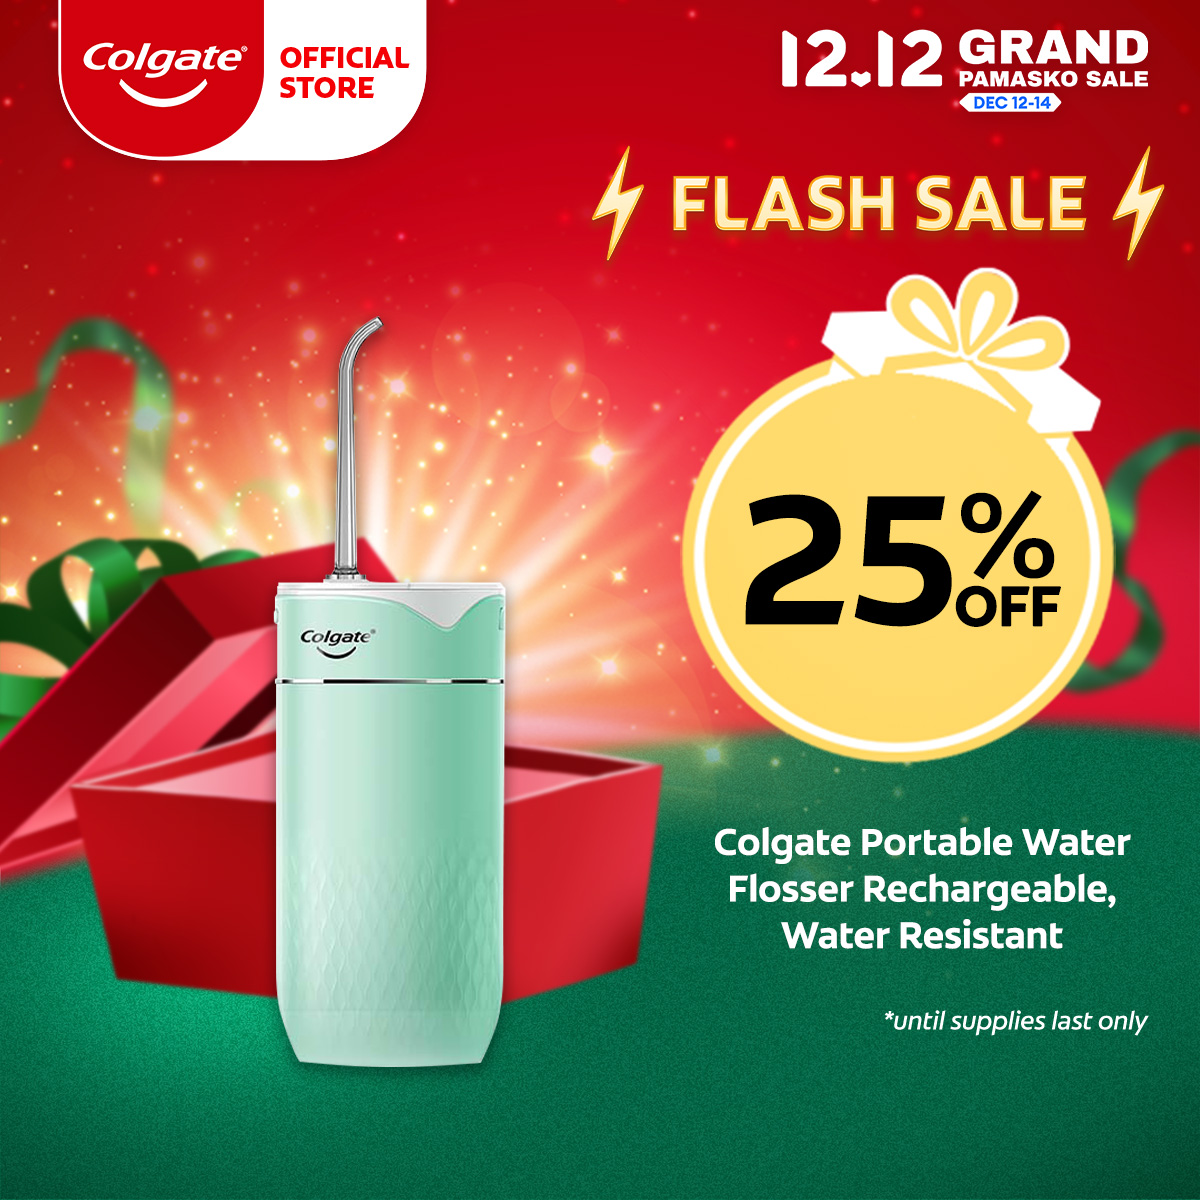 Lazada Philippines - Colgate Portable Water Flosser Rechargeable, Water Resistant (Green)